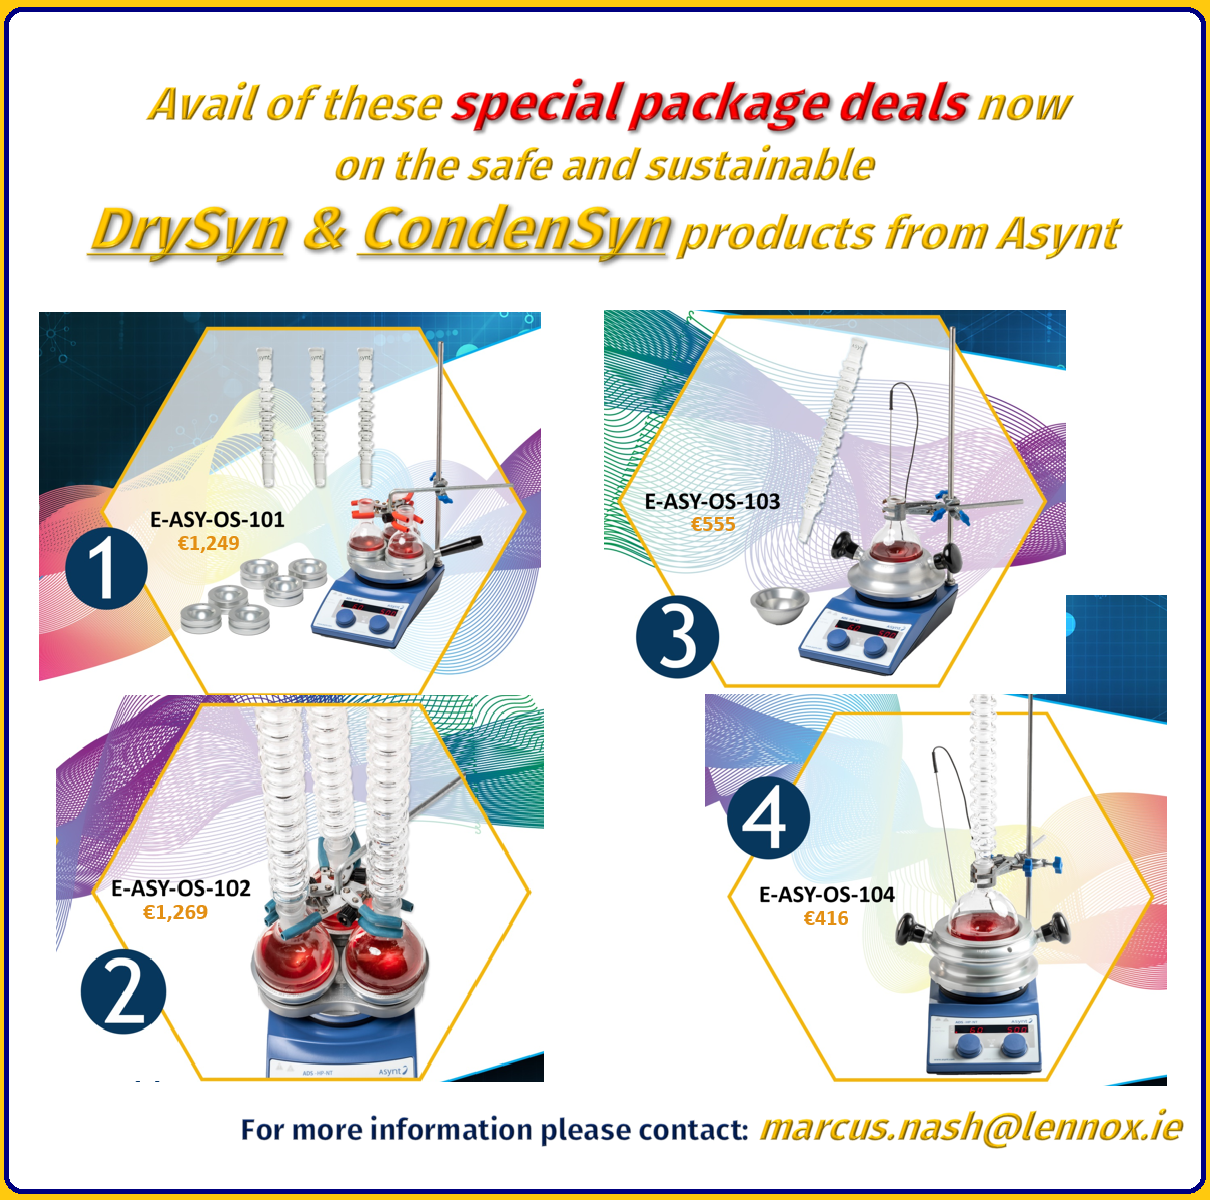 Asynt package deal